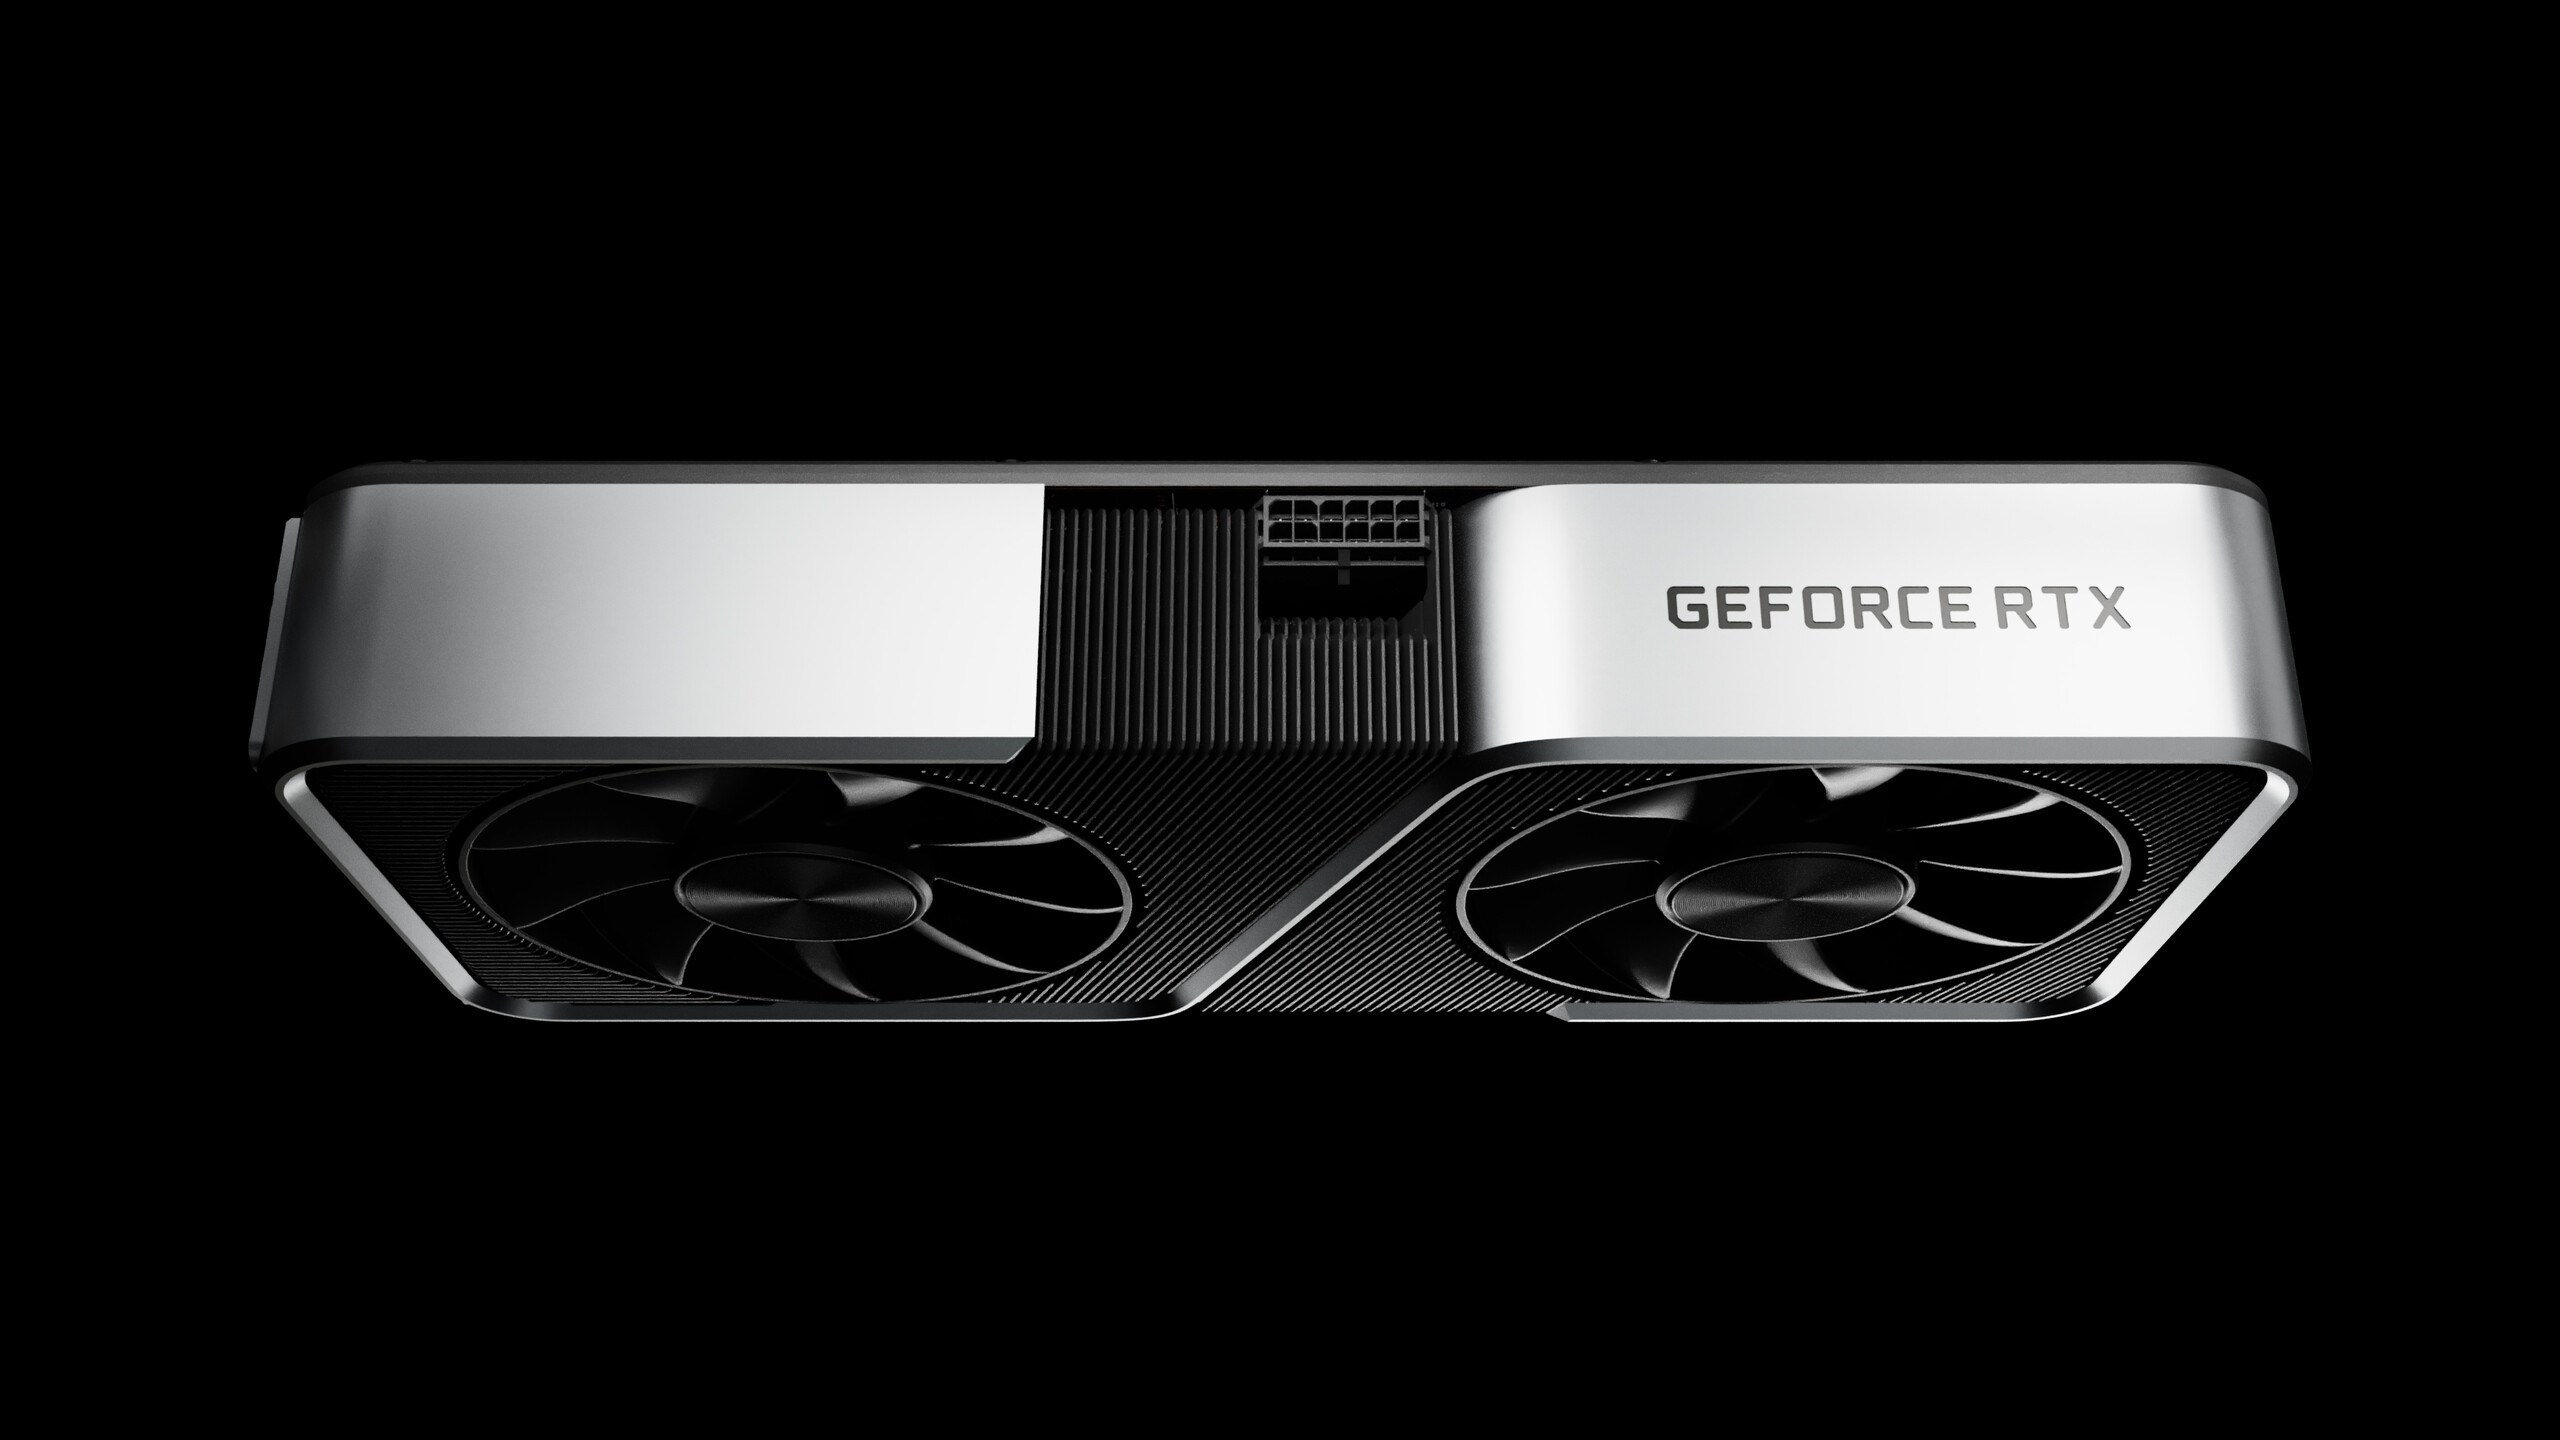 The entire GeForce RTX 3000 Super series' specs have been leaked online -